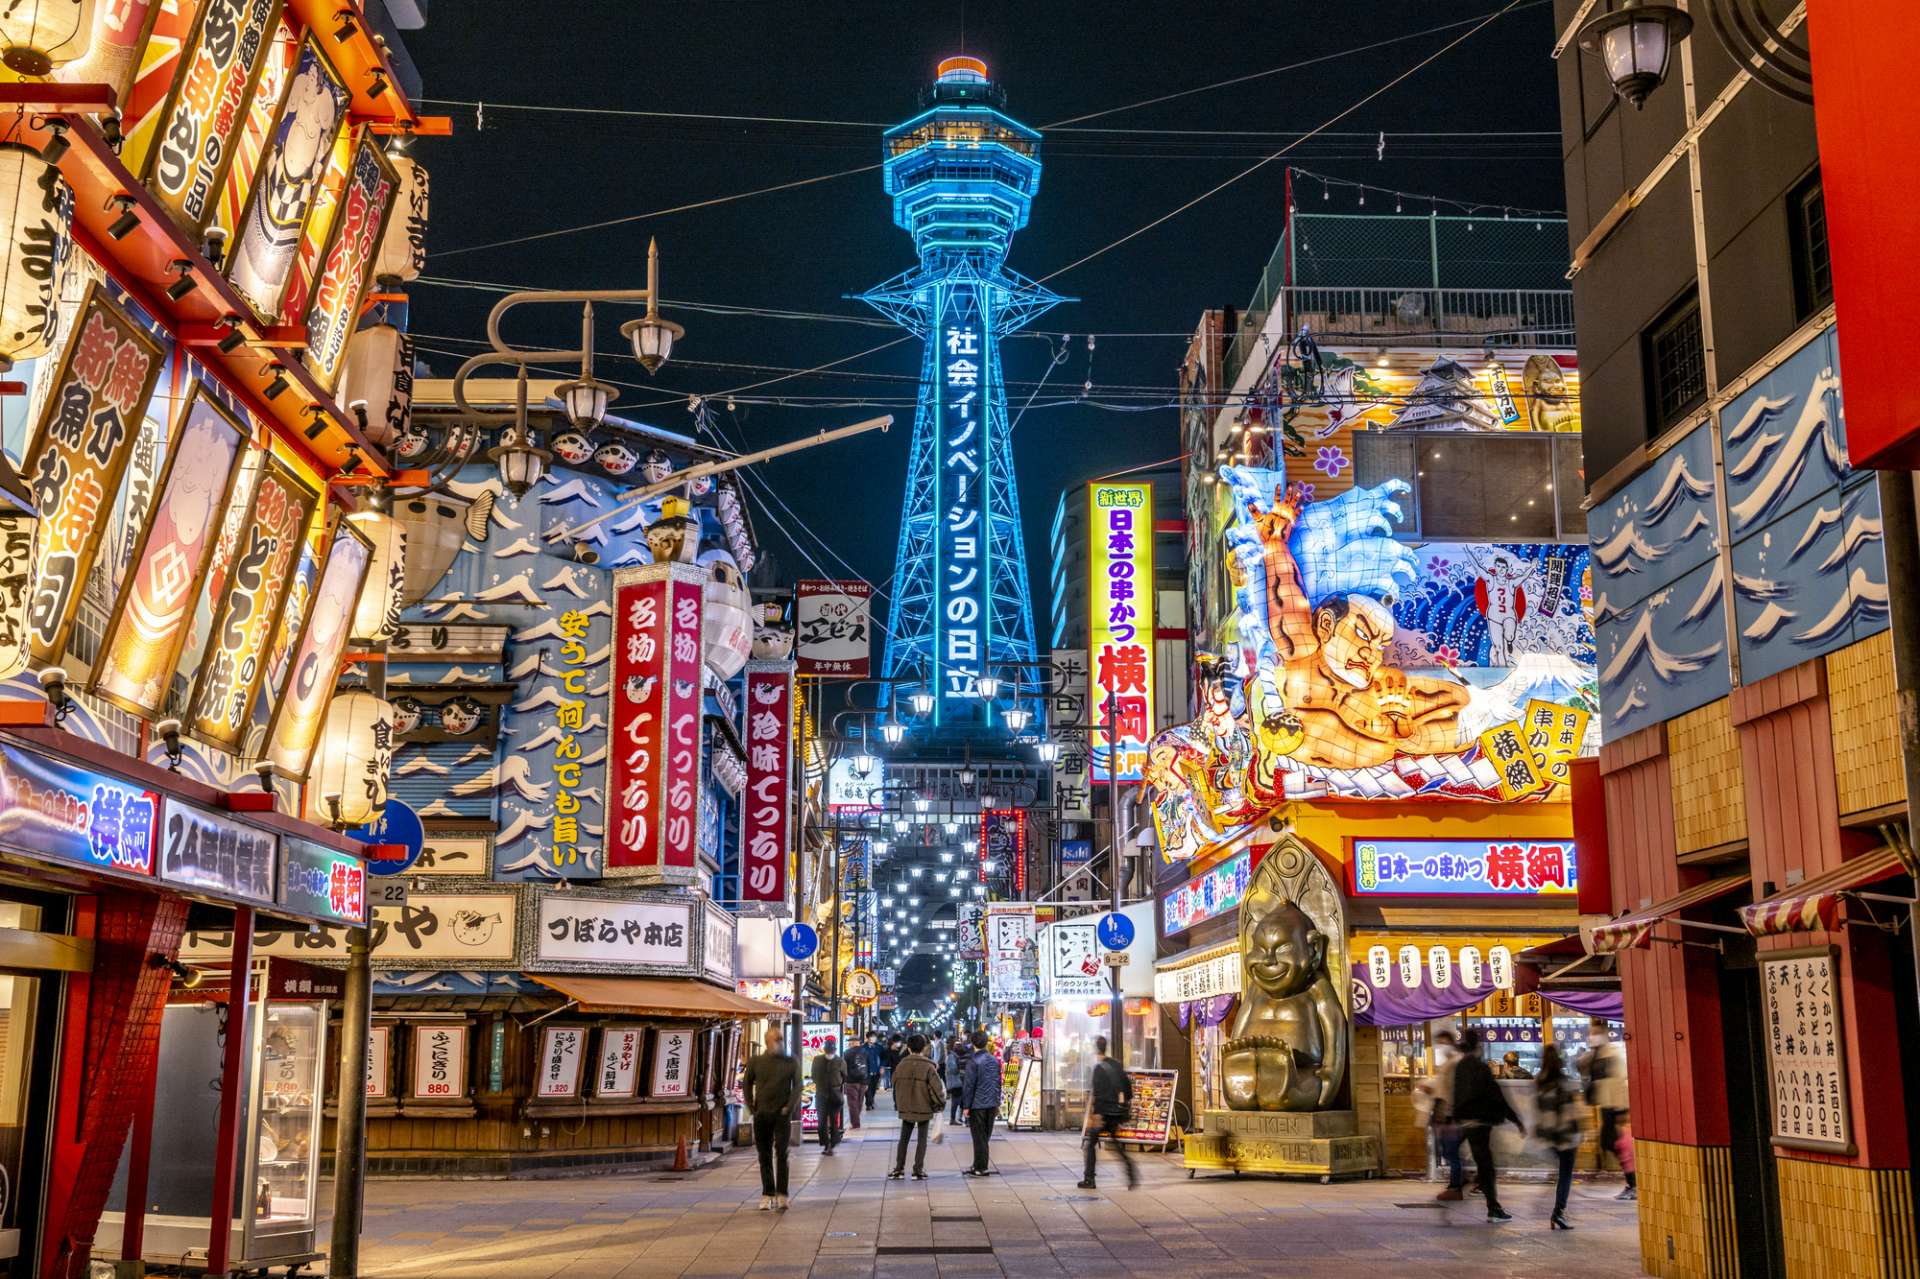 Osaka is one of Japan's premier tourist destinations with a deep history.